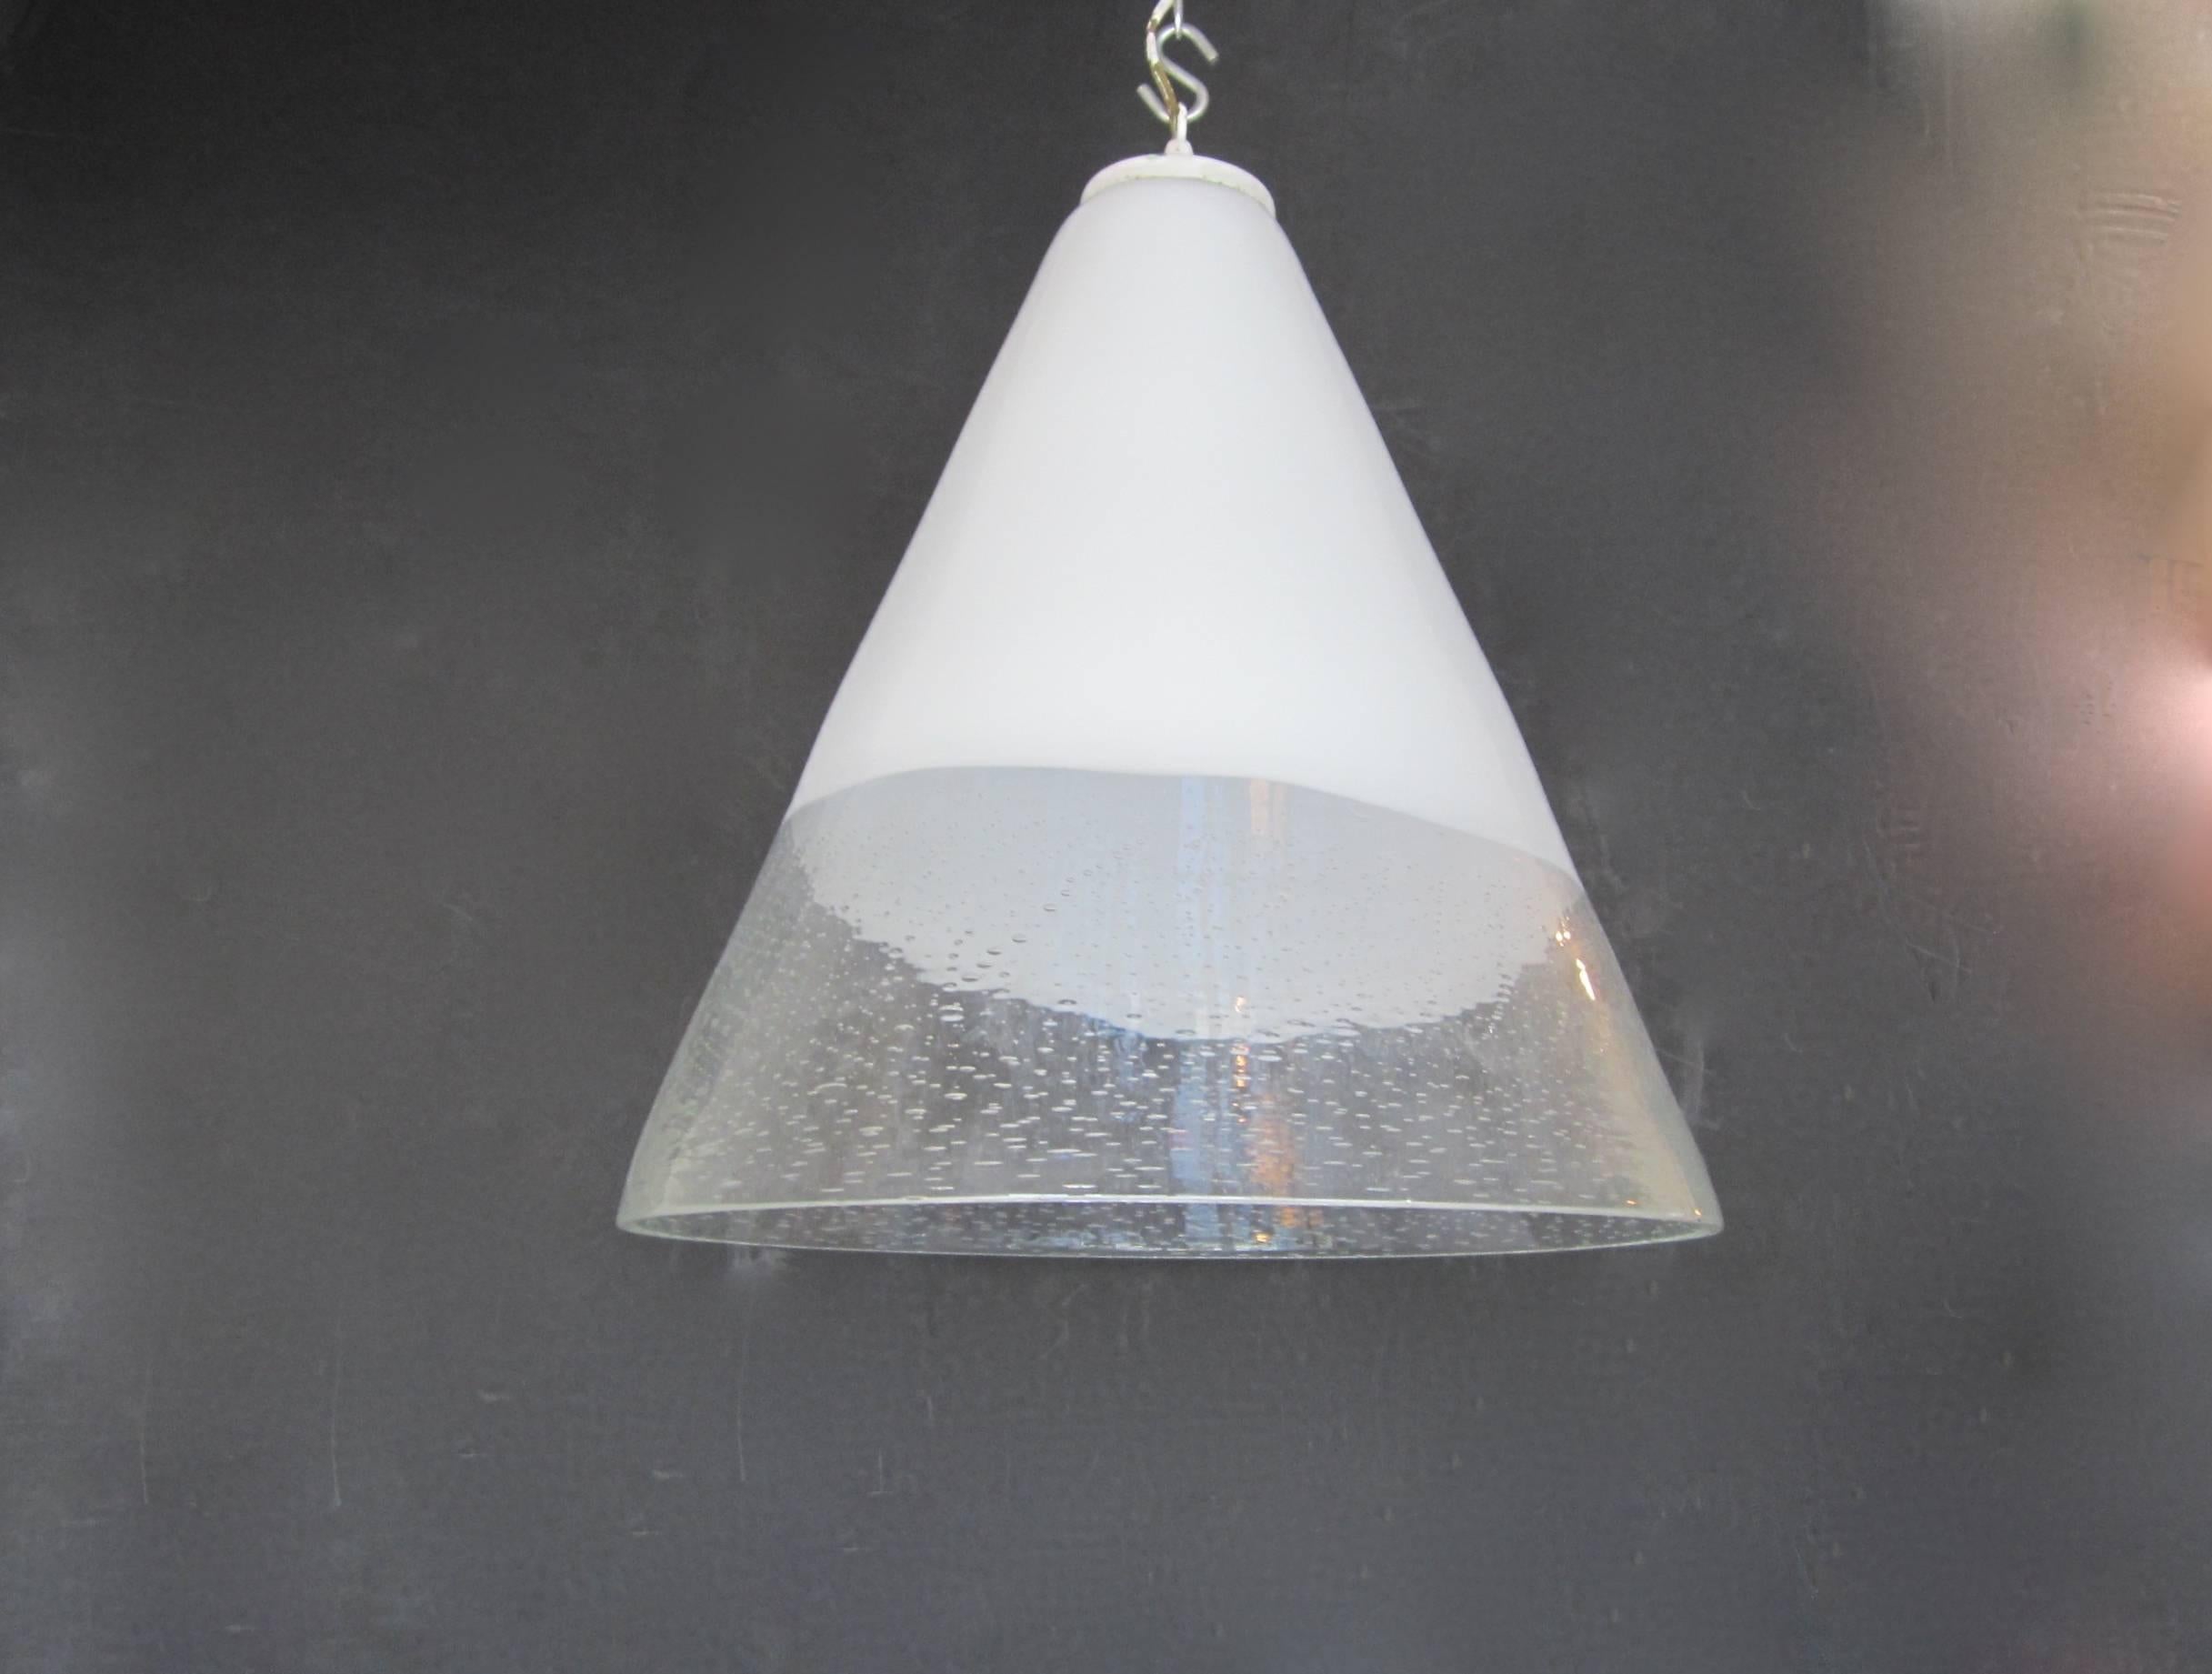 Gorgeous conical hanging (chandelier) with white opaque top and clear lower section with controlled bubble inclusions. Maintains its original Vetri Murano sticker. No canopy.